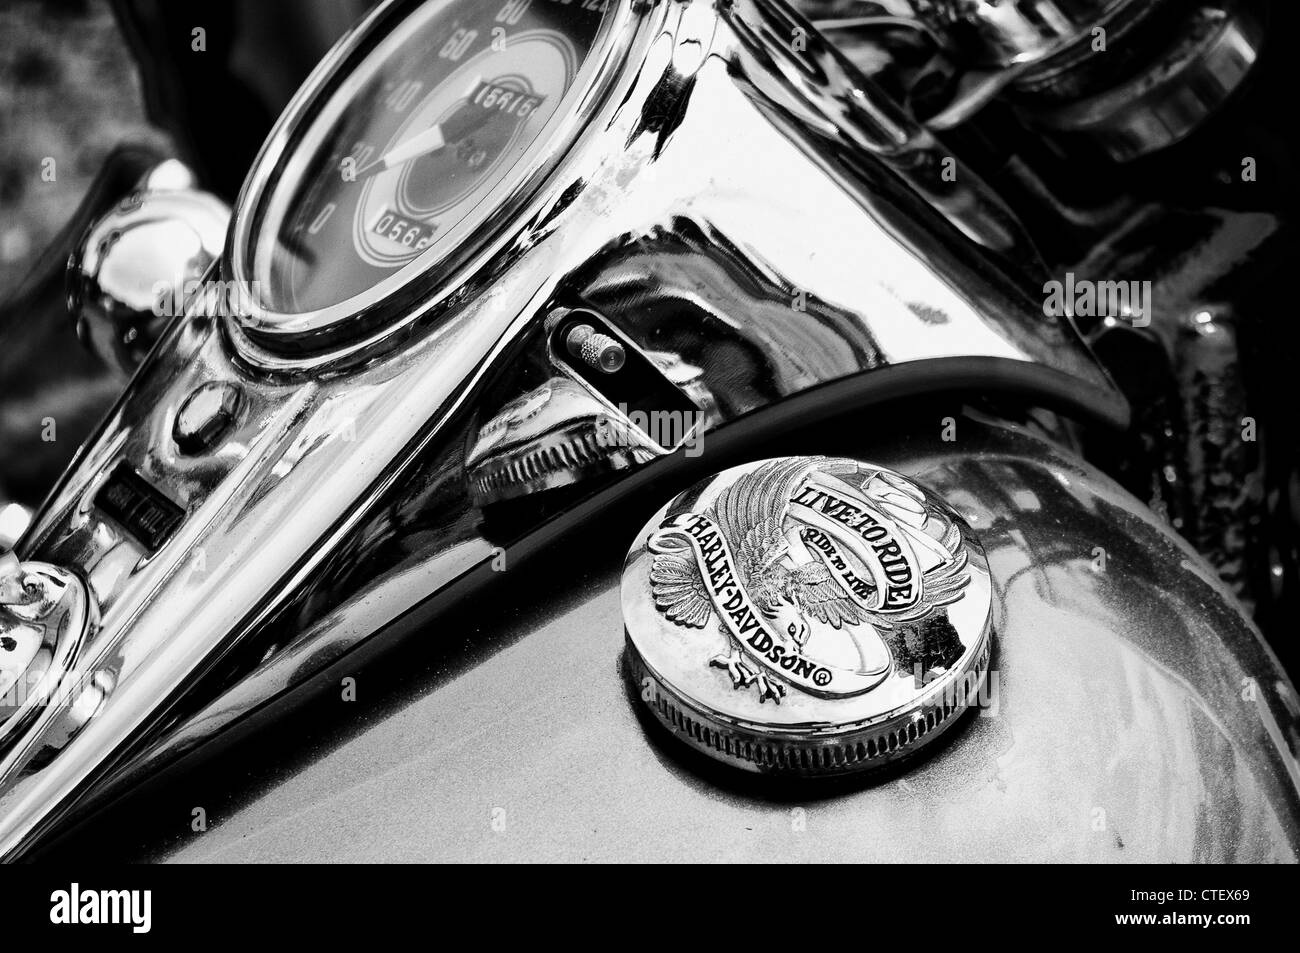 The dashboard and fuel tank cover motorcycle Harley-Davidson (Black and White) Stock Photo